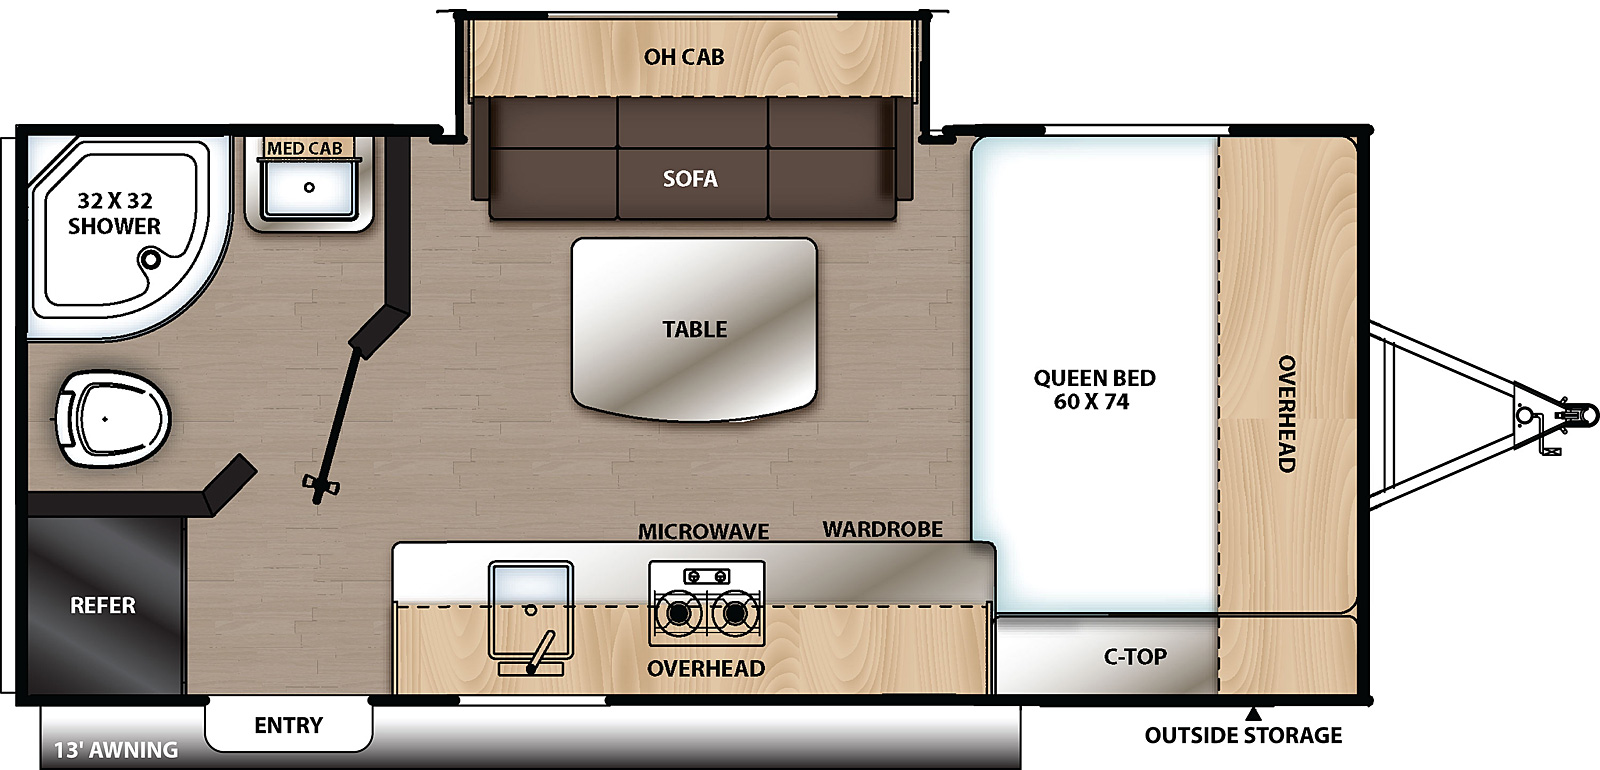 The 174FQS has one slide out on the off-door side and one entry door on the door side. Interior layout from front to back: side facing queen bed with cabinets overhead. Kitchen living dining area with slide out on the off-door side containing sofa with cabinets overhead. Freestanding table in the center, door side with wardrobe closet, microwave overhead of stove, single bowl sink with refrigerator located on the door side rear. Rear corner bathroom. 